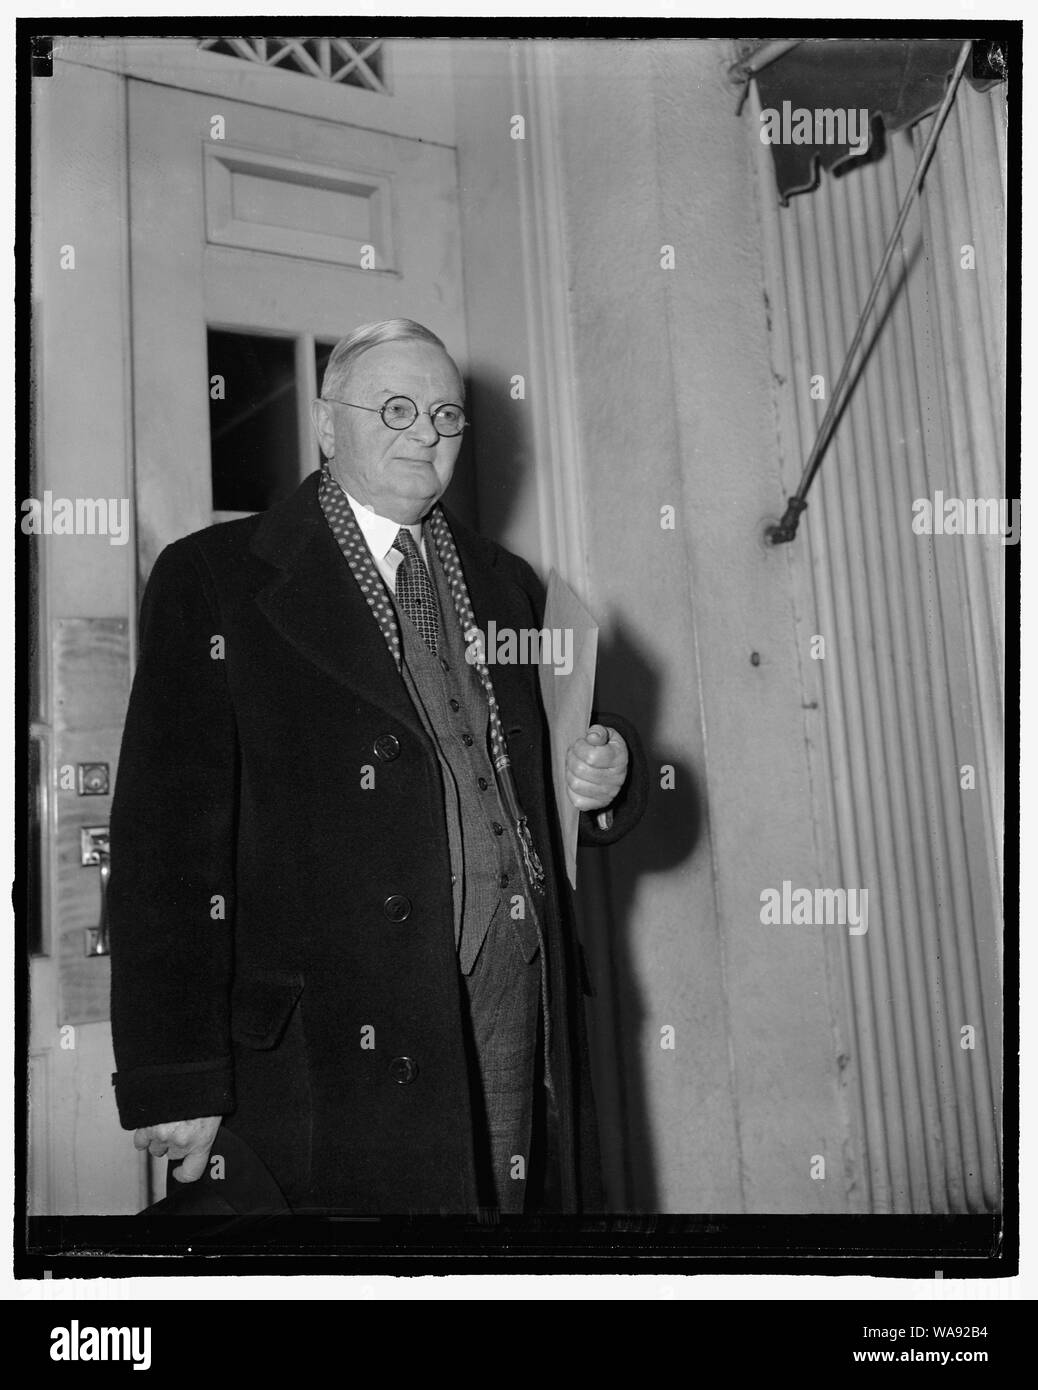 Census director confers with president. Washington, D.C., March 8. Leaving the White House today, William L. Austin, director of the census, refused to tell reporters what was discussed at a conference with President Roosevelt, 3-8-40 Stock Photo